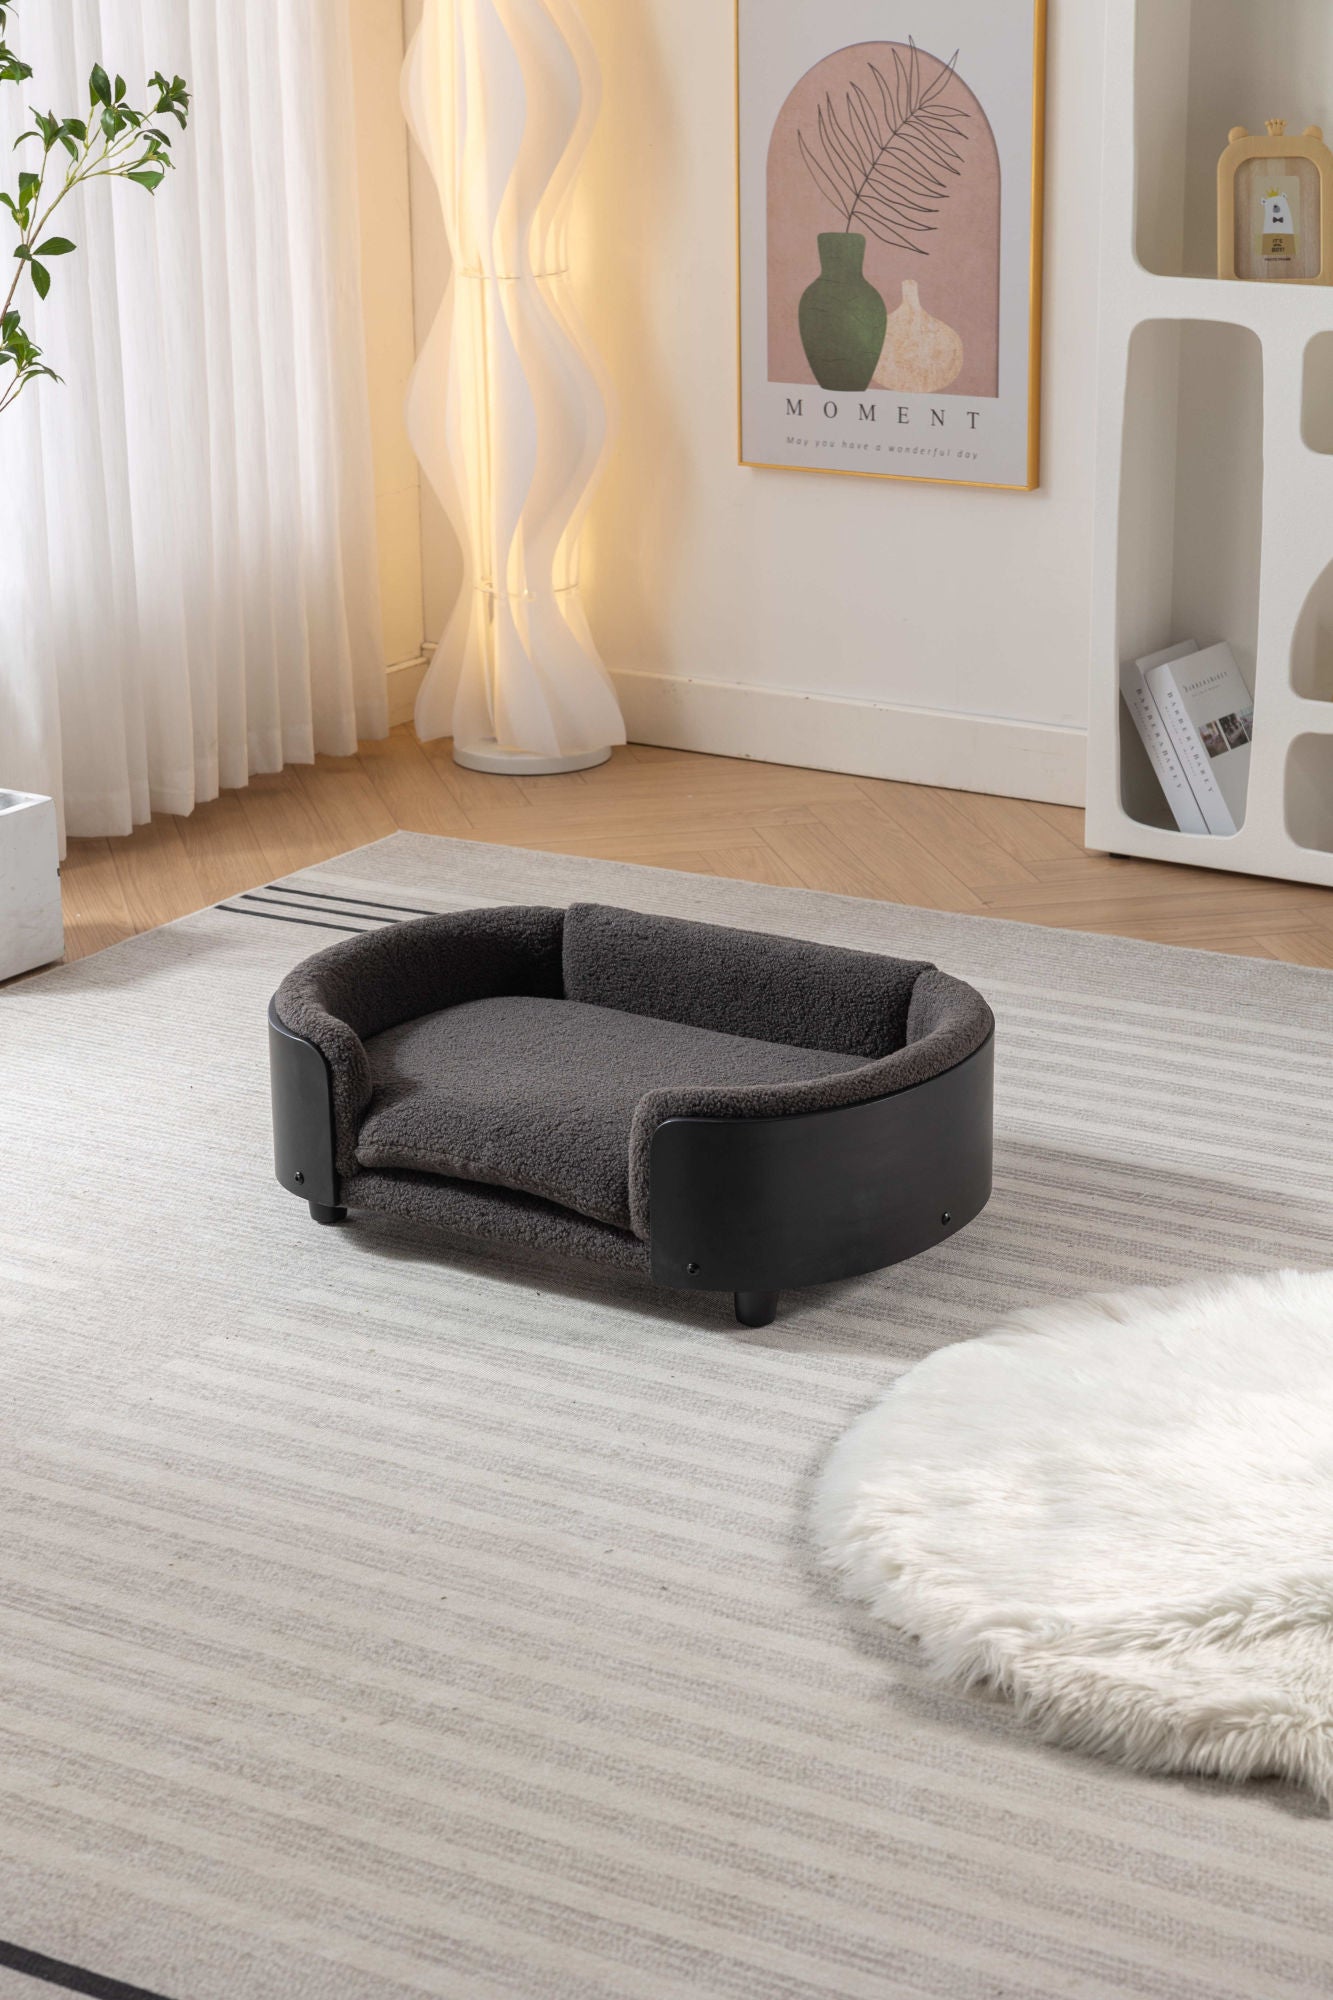 Scandinavian style Elevated Dog Bed Pet Sofa With Solid Wood legs and Black Bent Wood Back, Cashmere Cushion,Mid Size